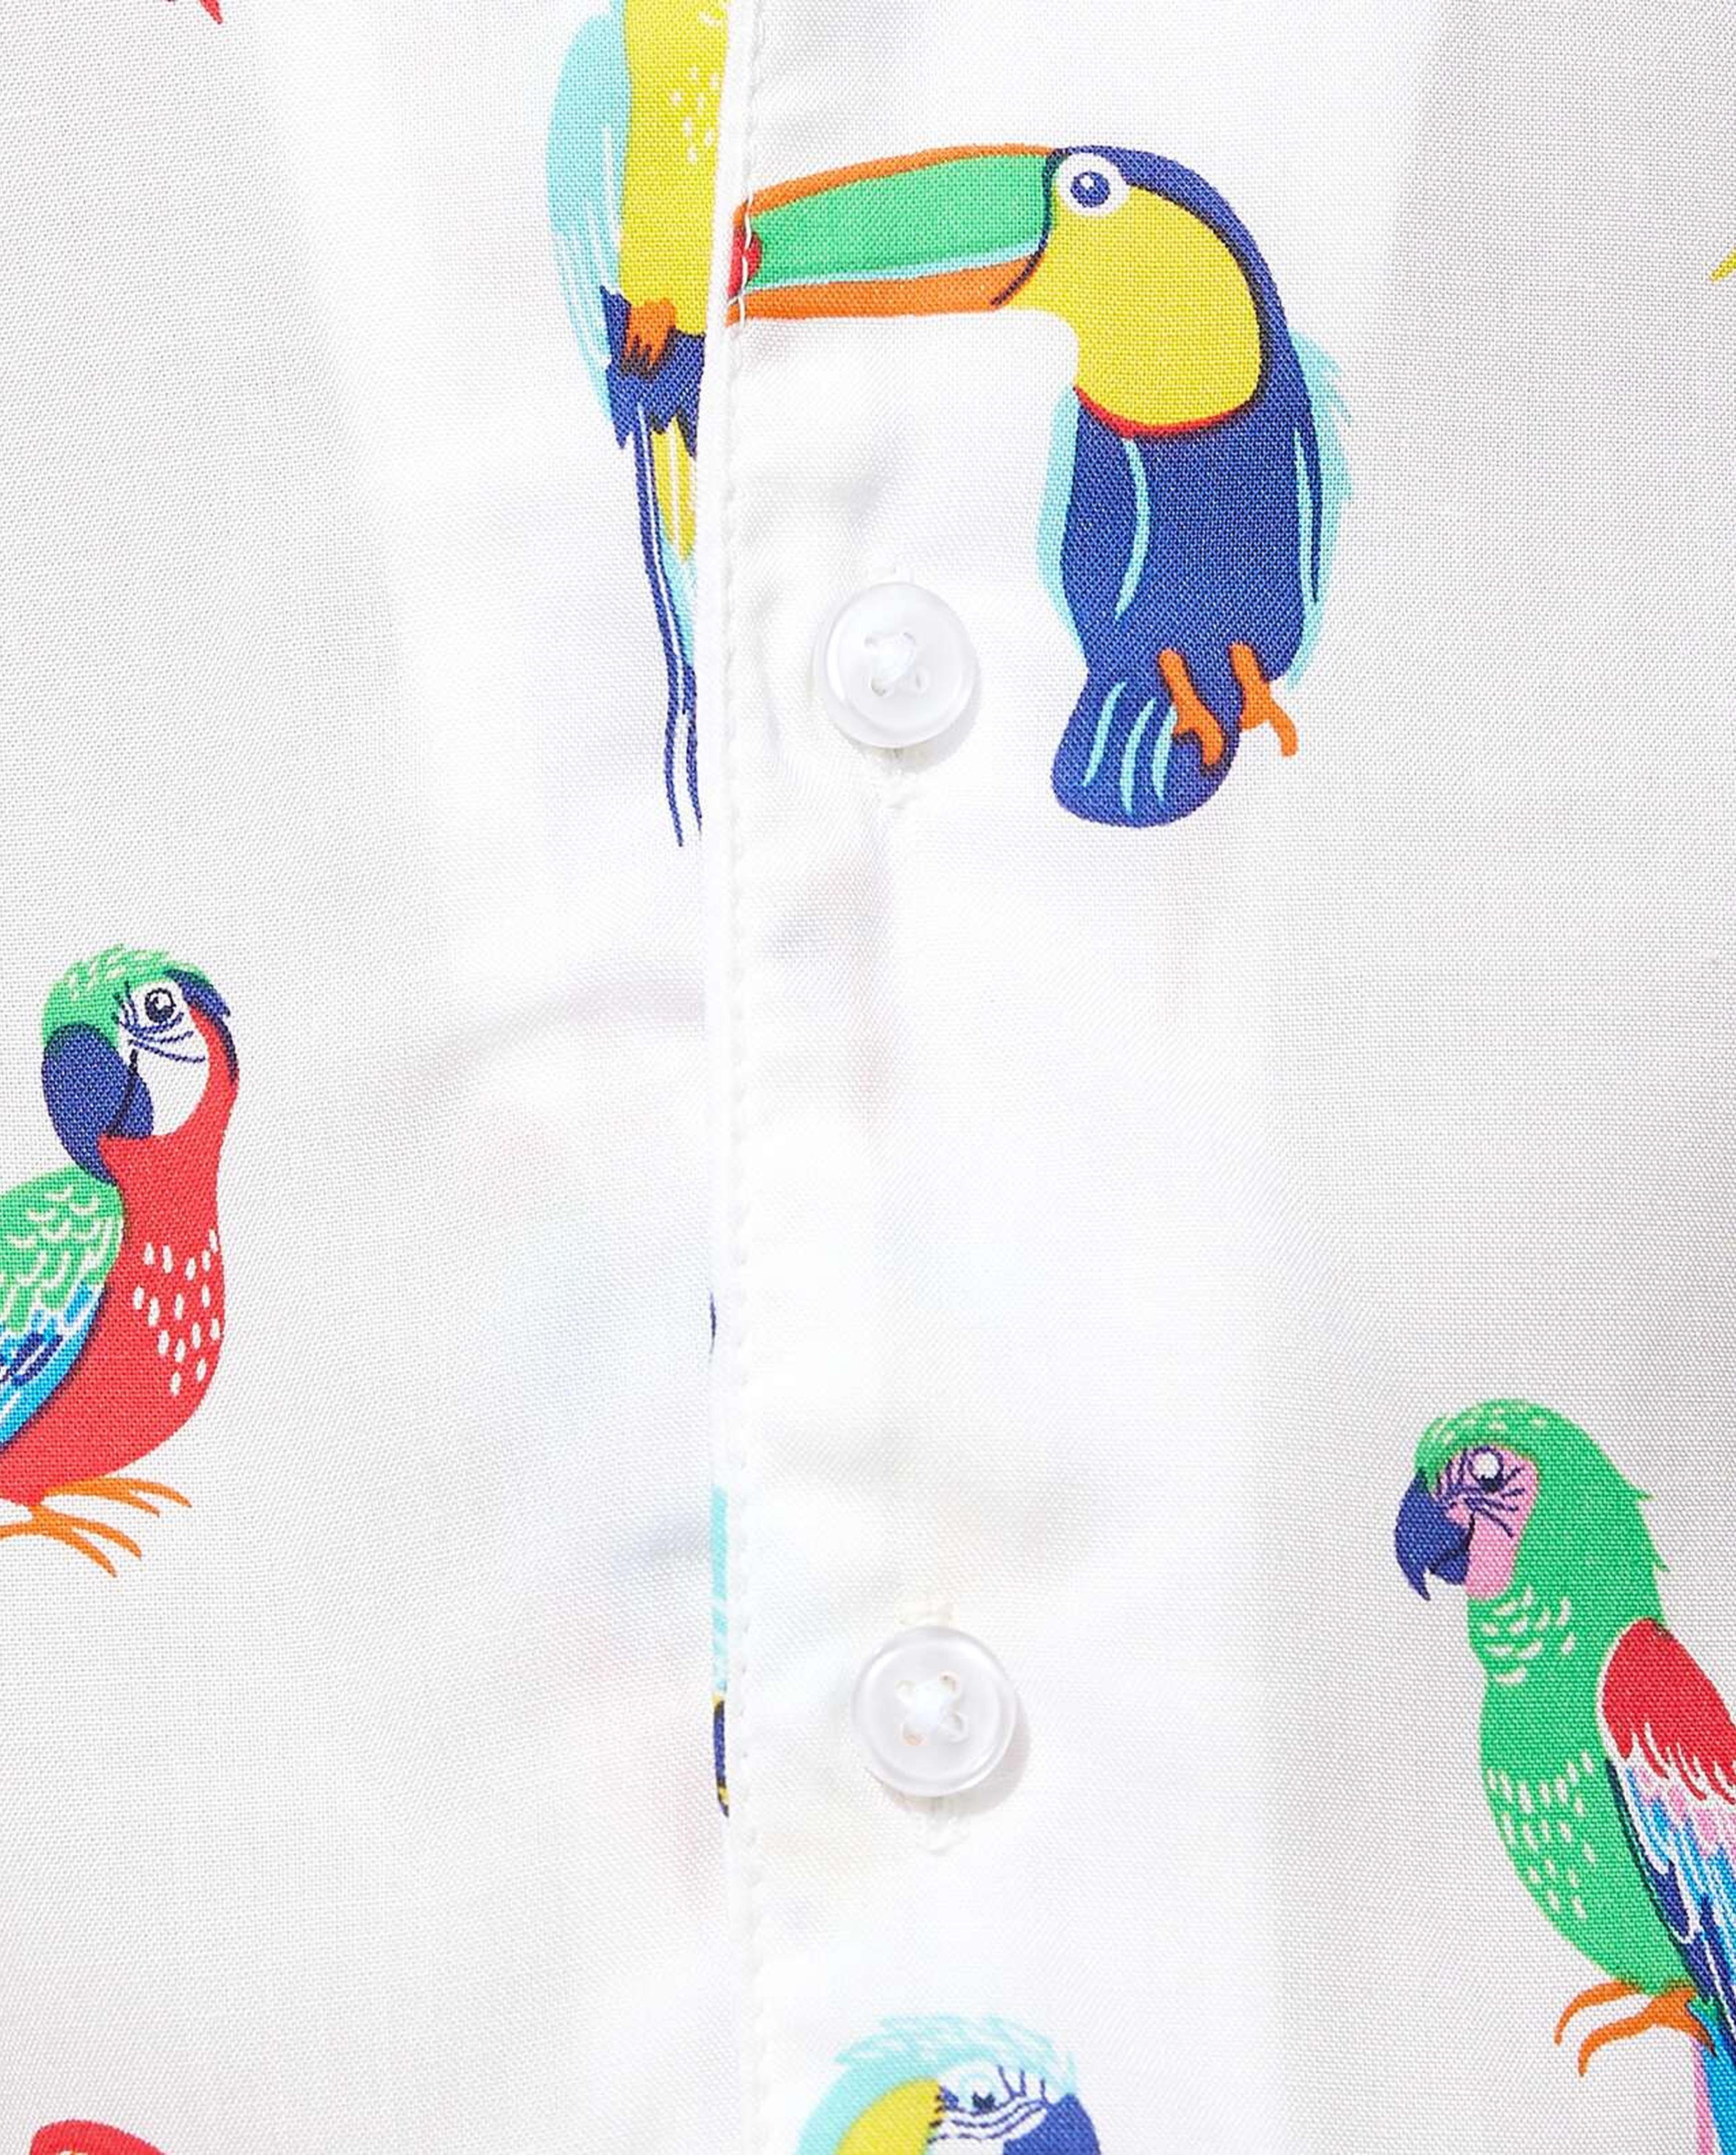 Parrot Print Shirt with Revere Collar and Short Sleeves